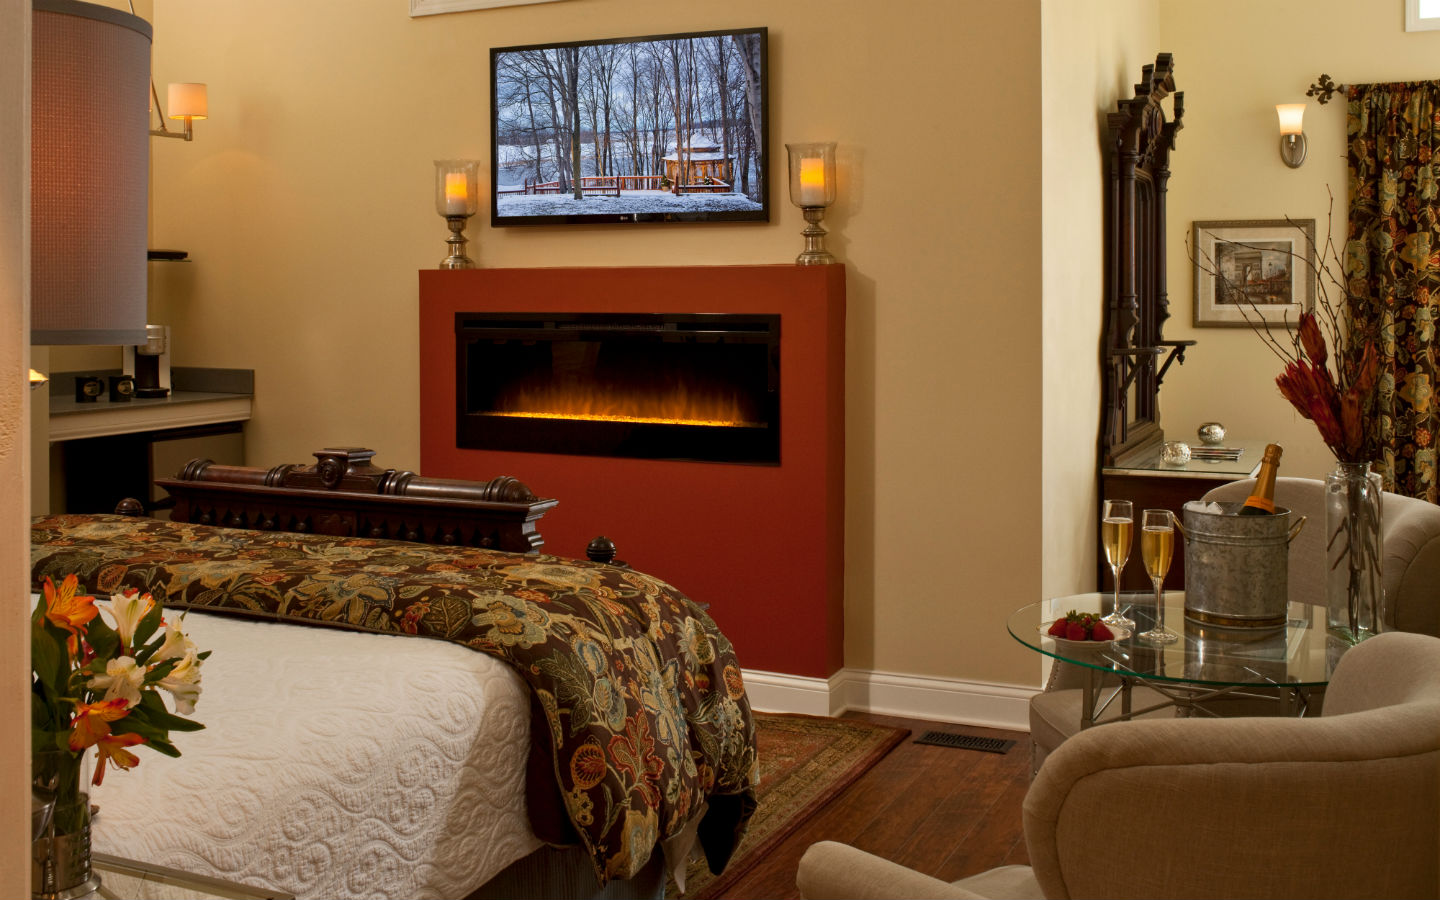 Camelot Suite with winter photo on TV